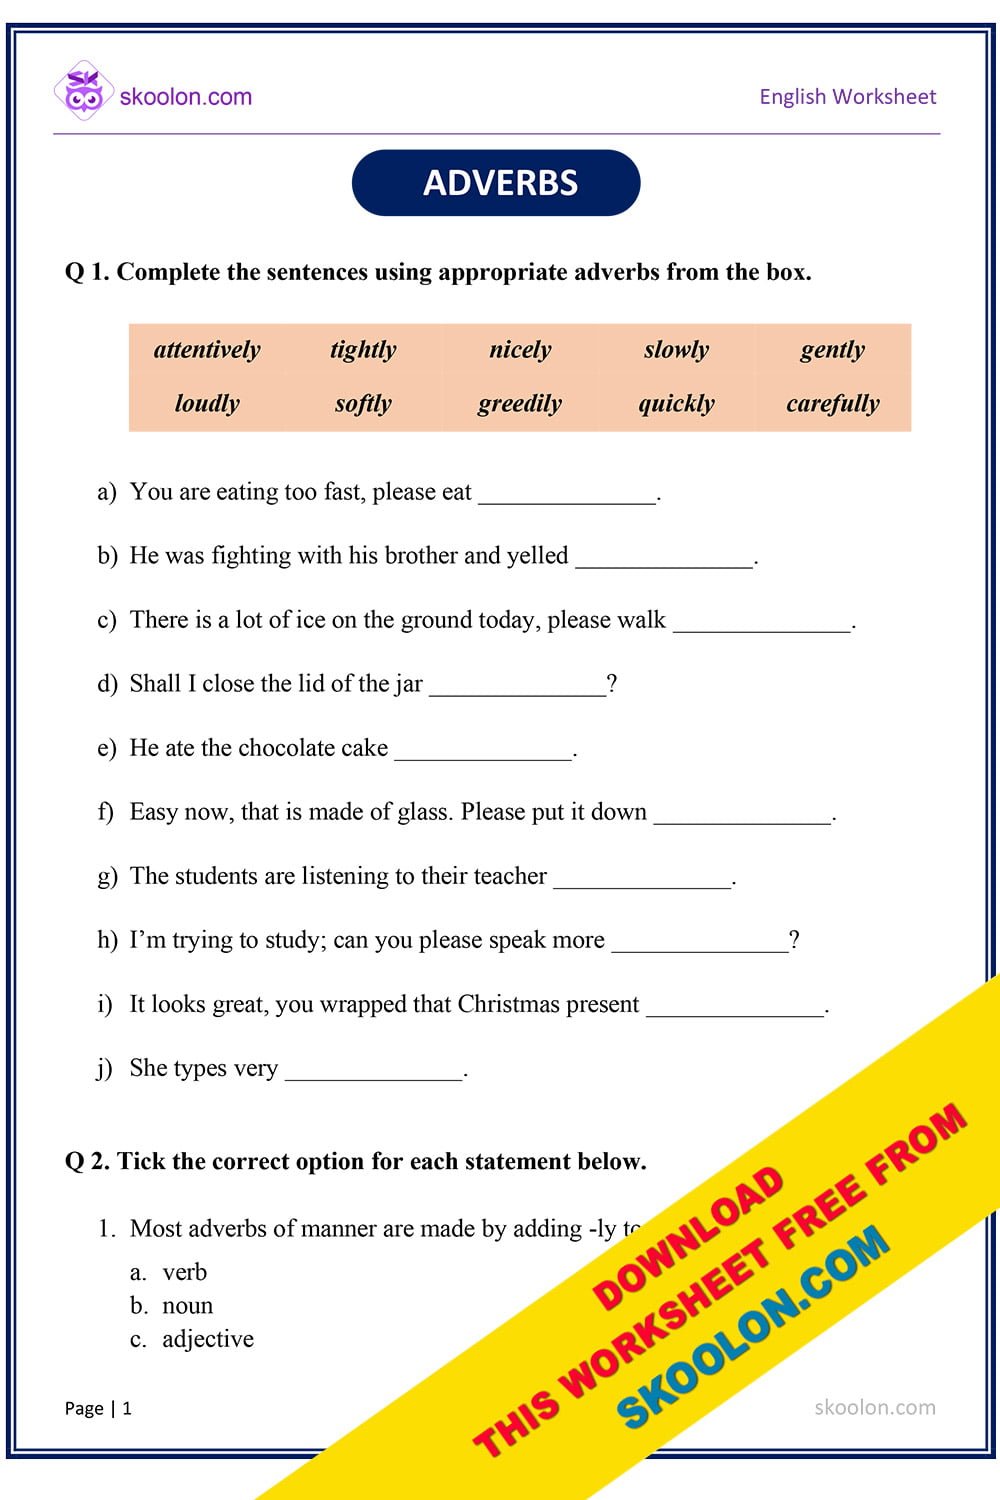 adverbs-worksheet-with-answers-skoolon